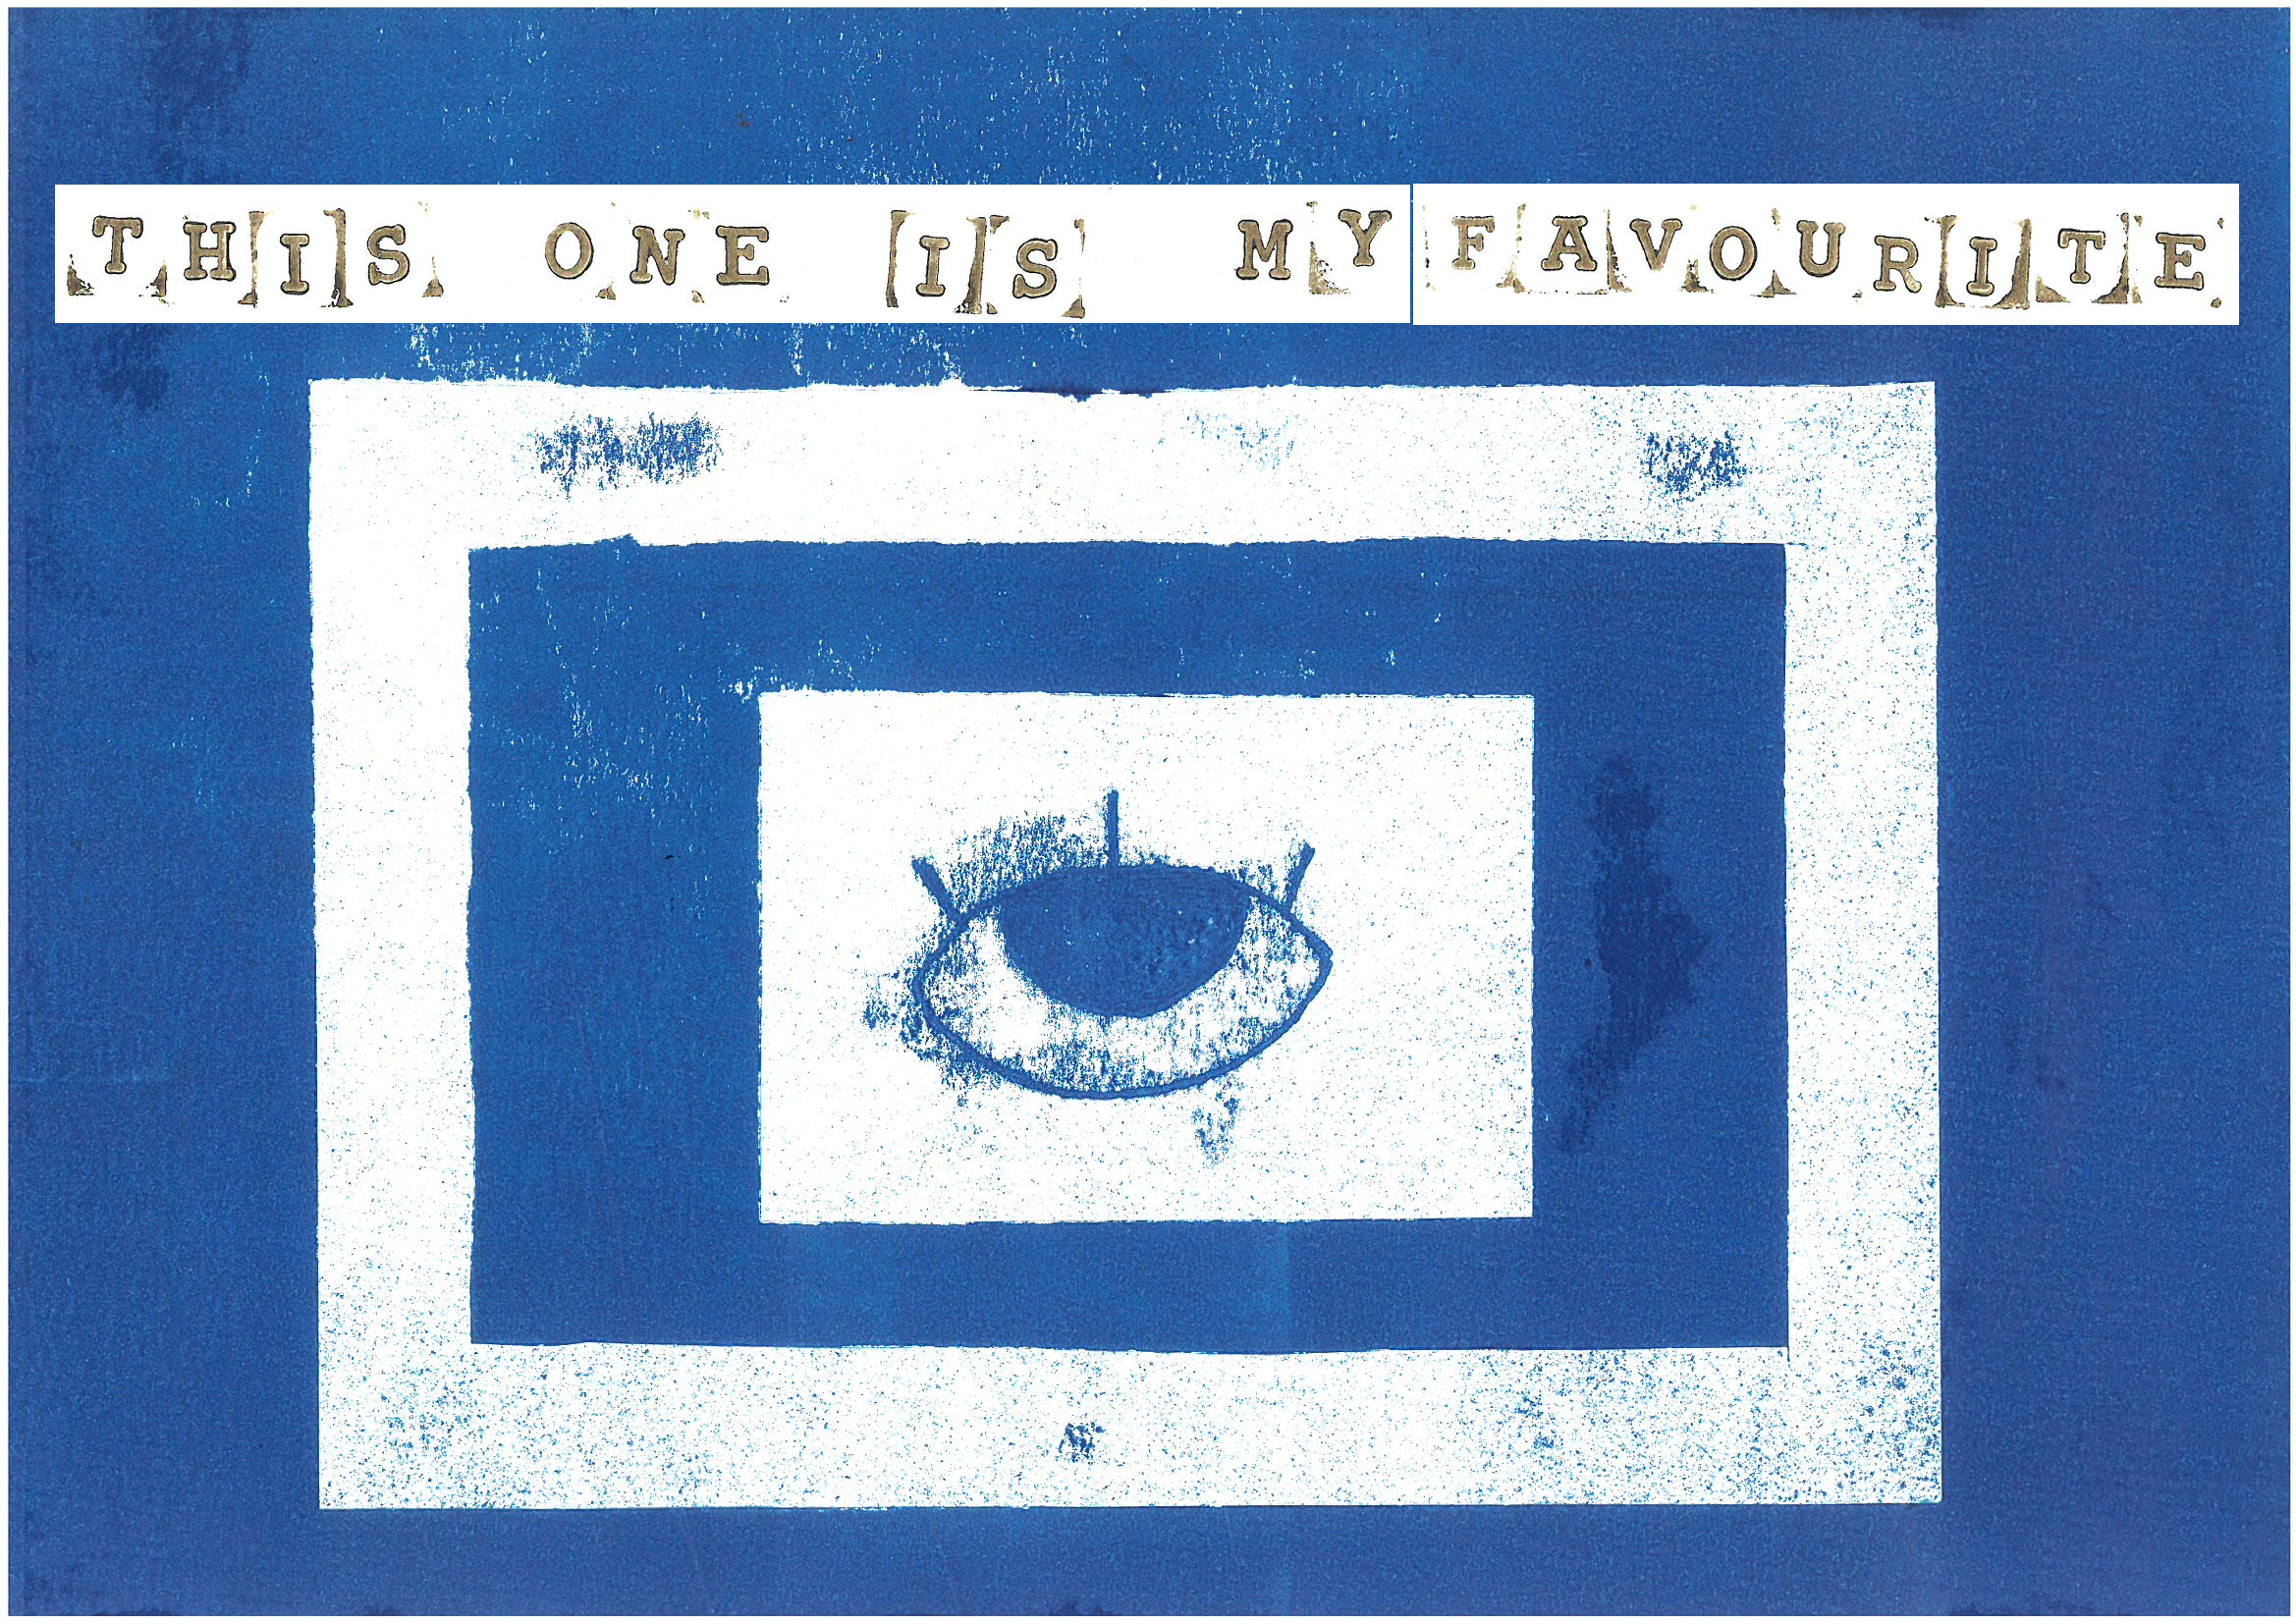 Blue monoprint on white paper of an eye inside a white box with a white border around it. Brown typewriter style text at the top reads 'This one is my favourite'.